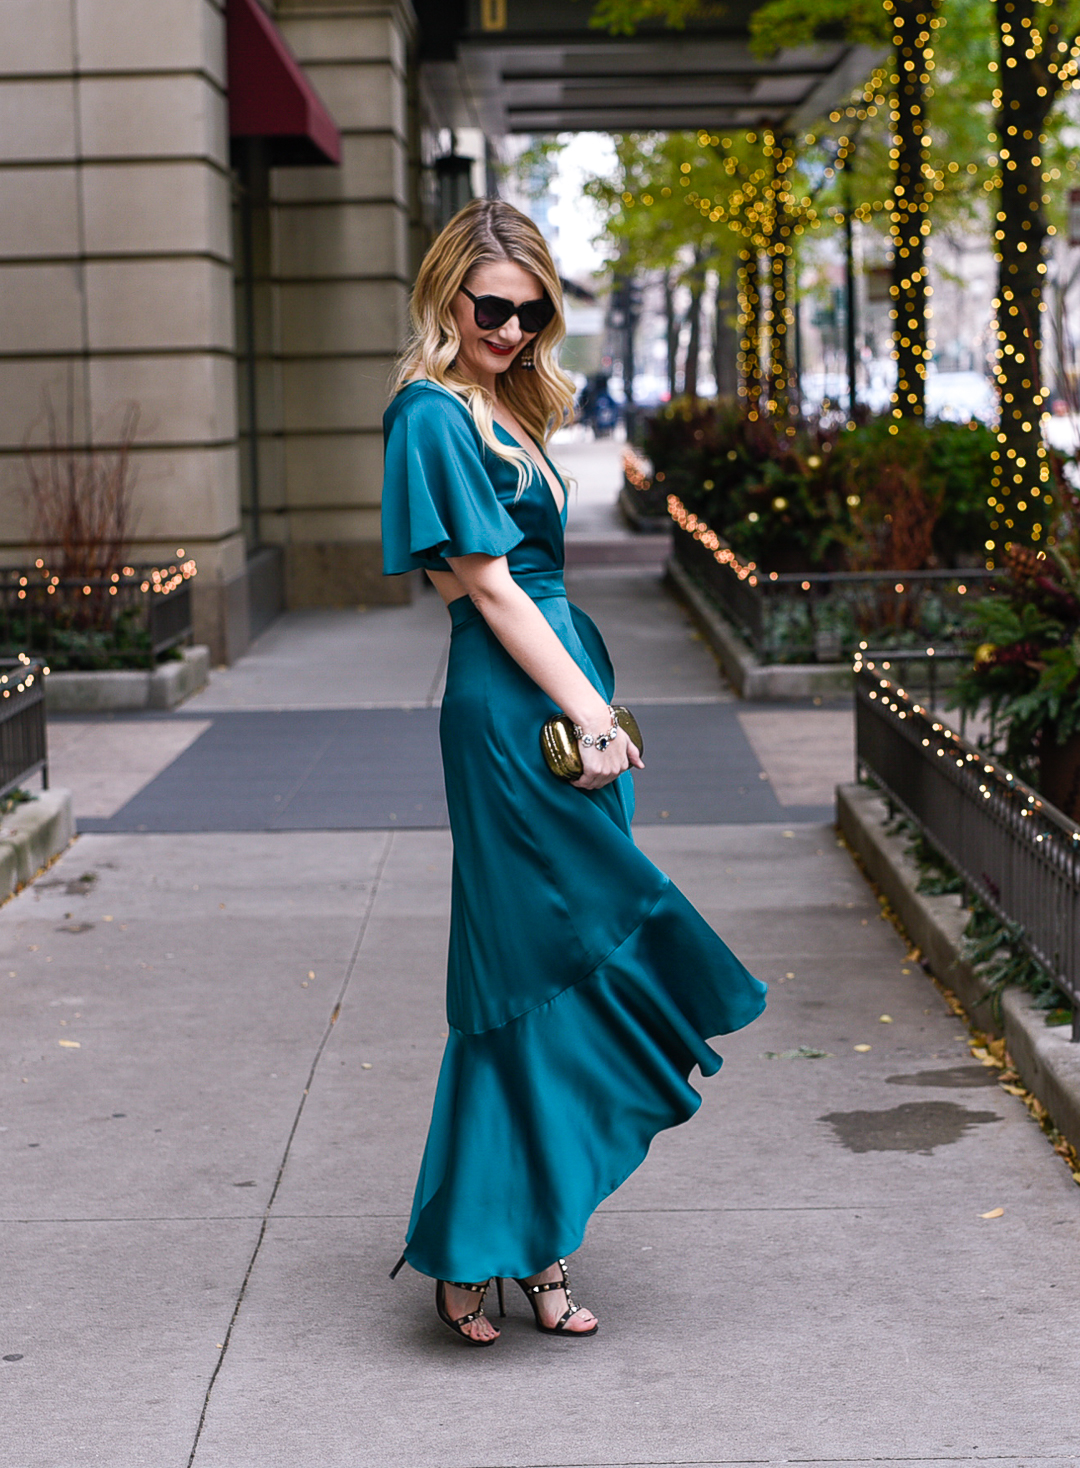 Jenna Colgrove wearing a satin jewel toned wrap dress from Rent the Runway. 